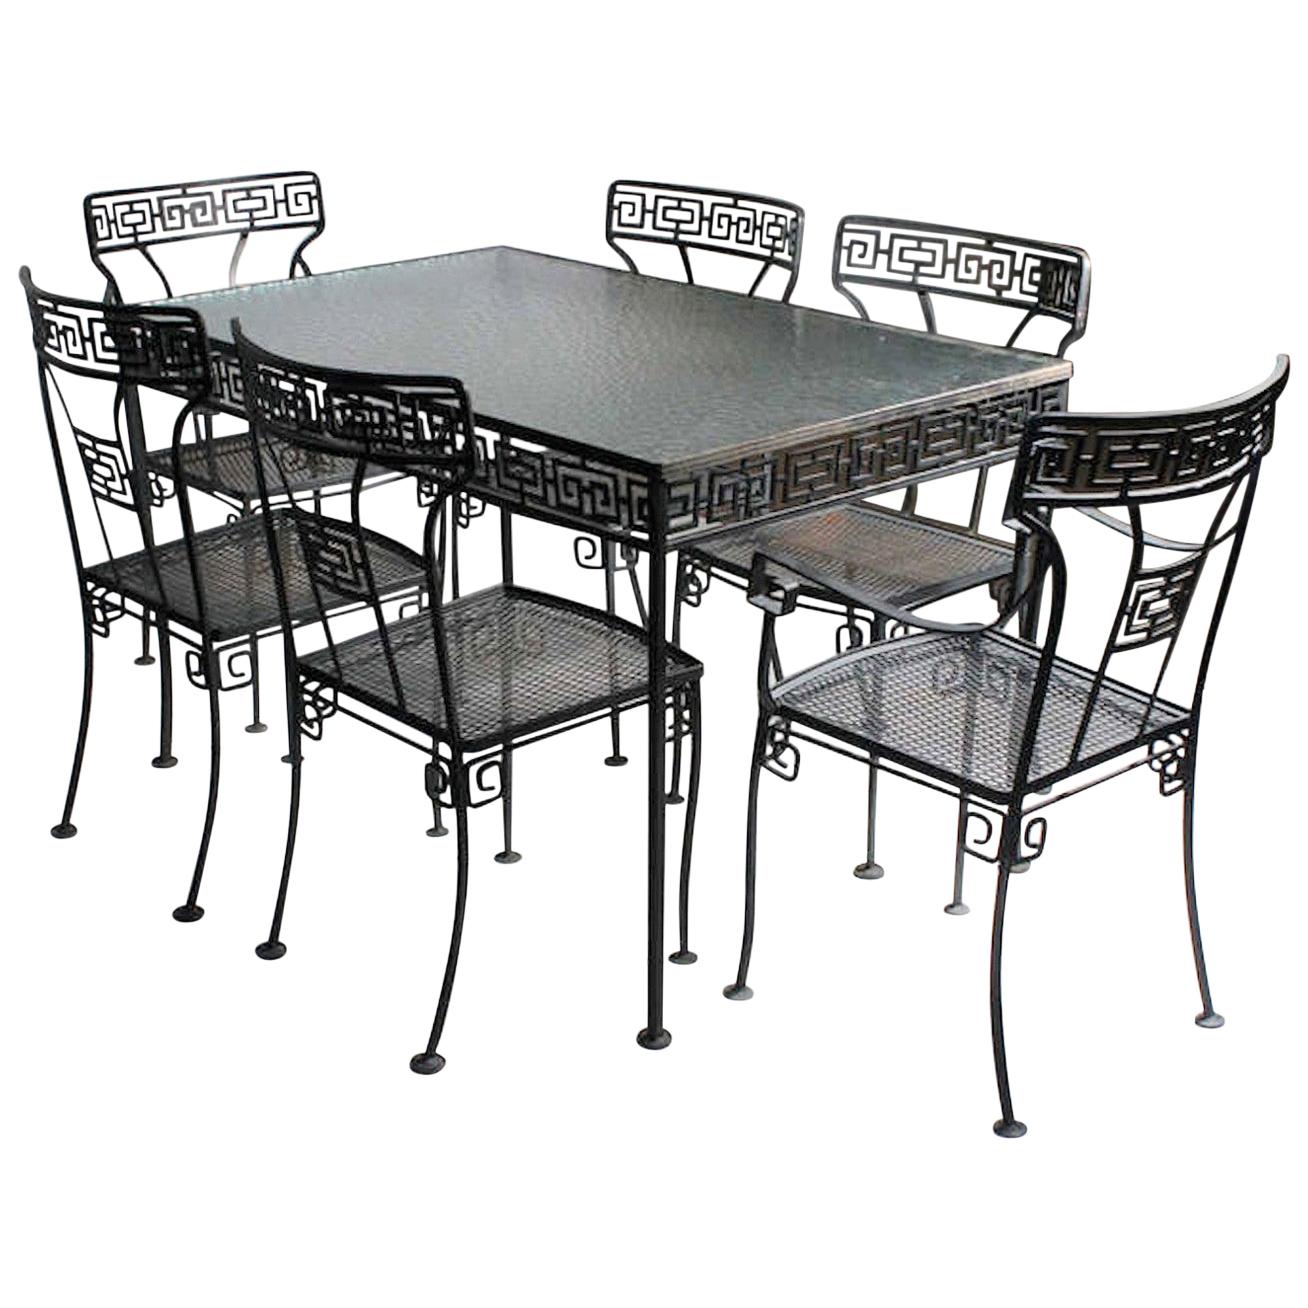 Midcentury Greek Key Patio Wrought Iron Glass Top Dining Chairs Table Set for 6